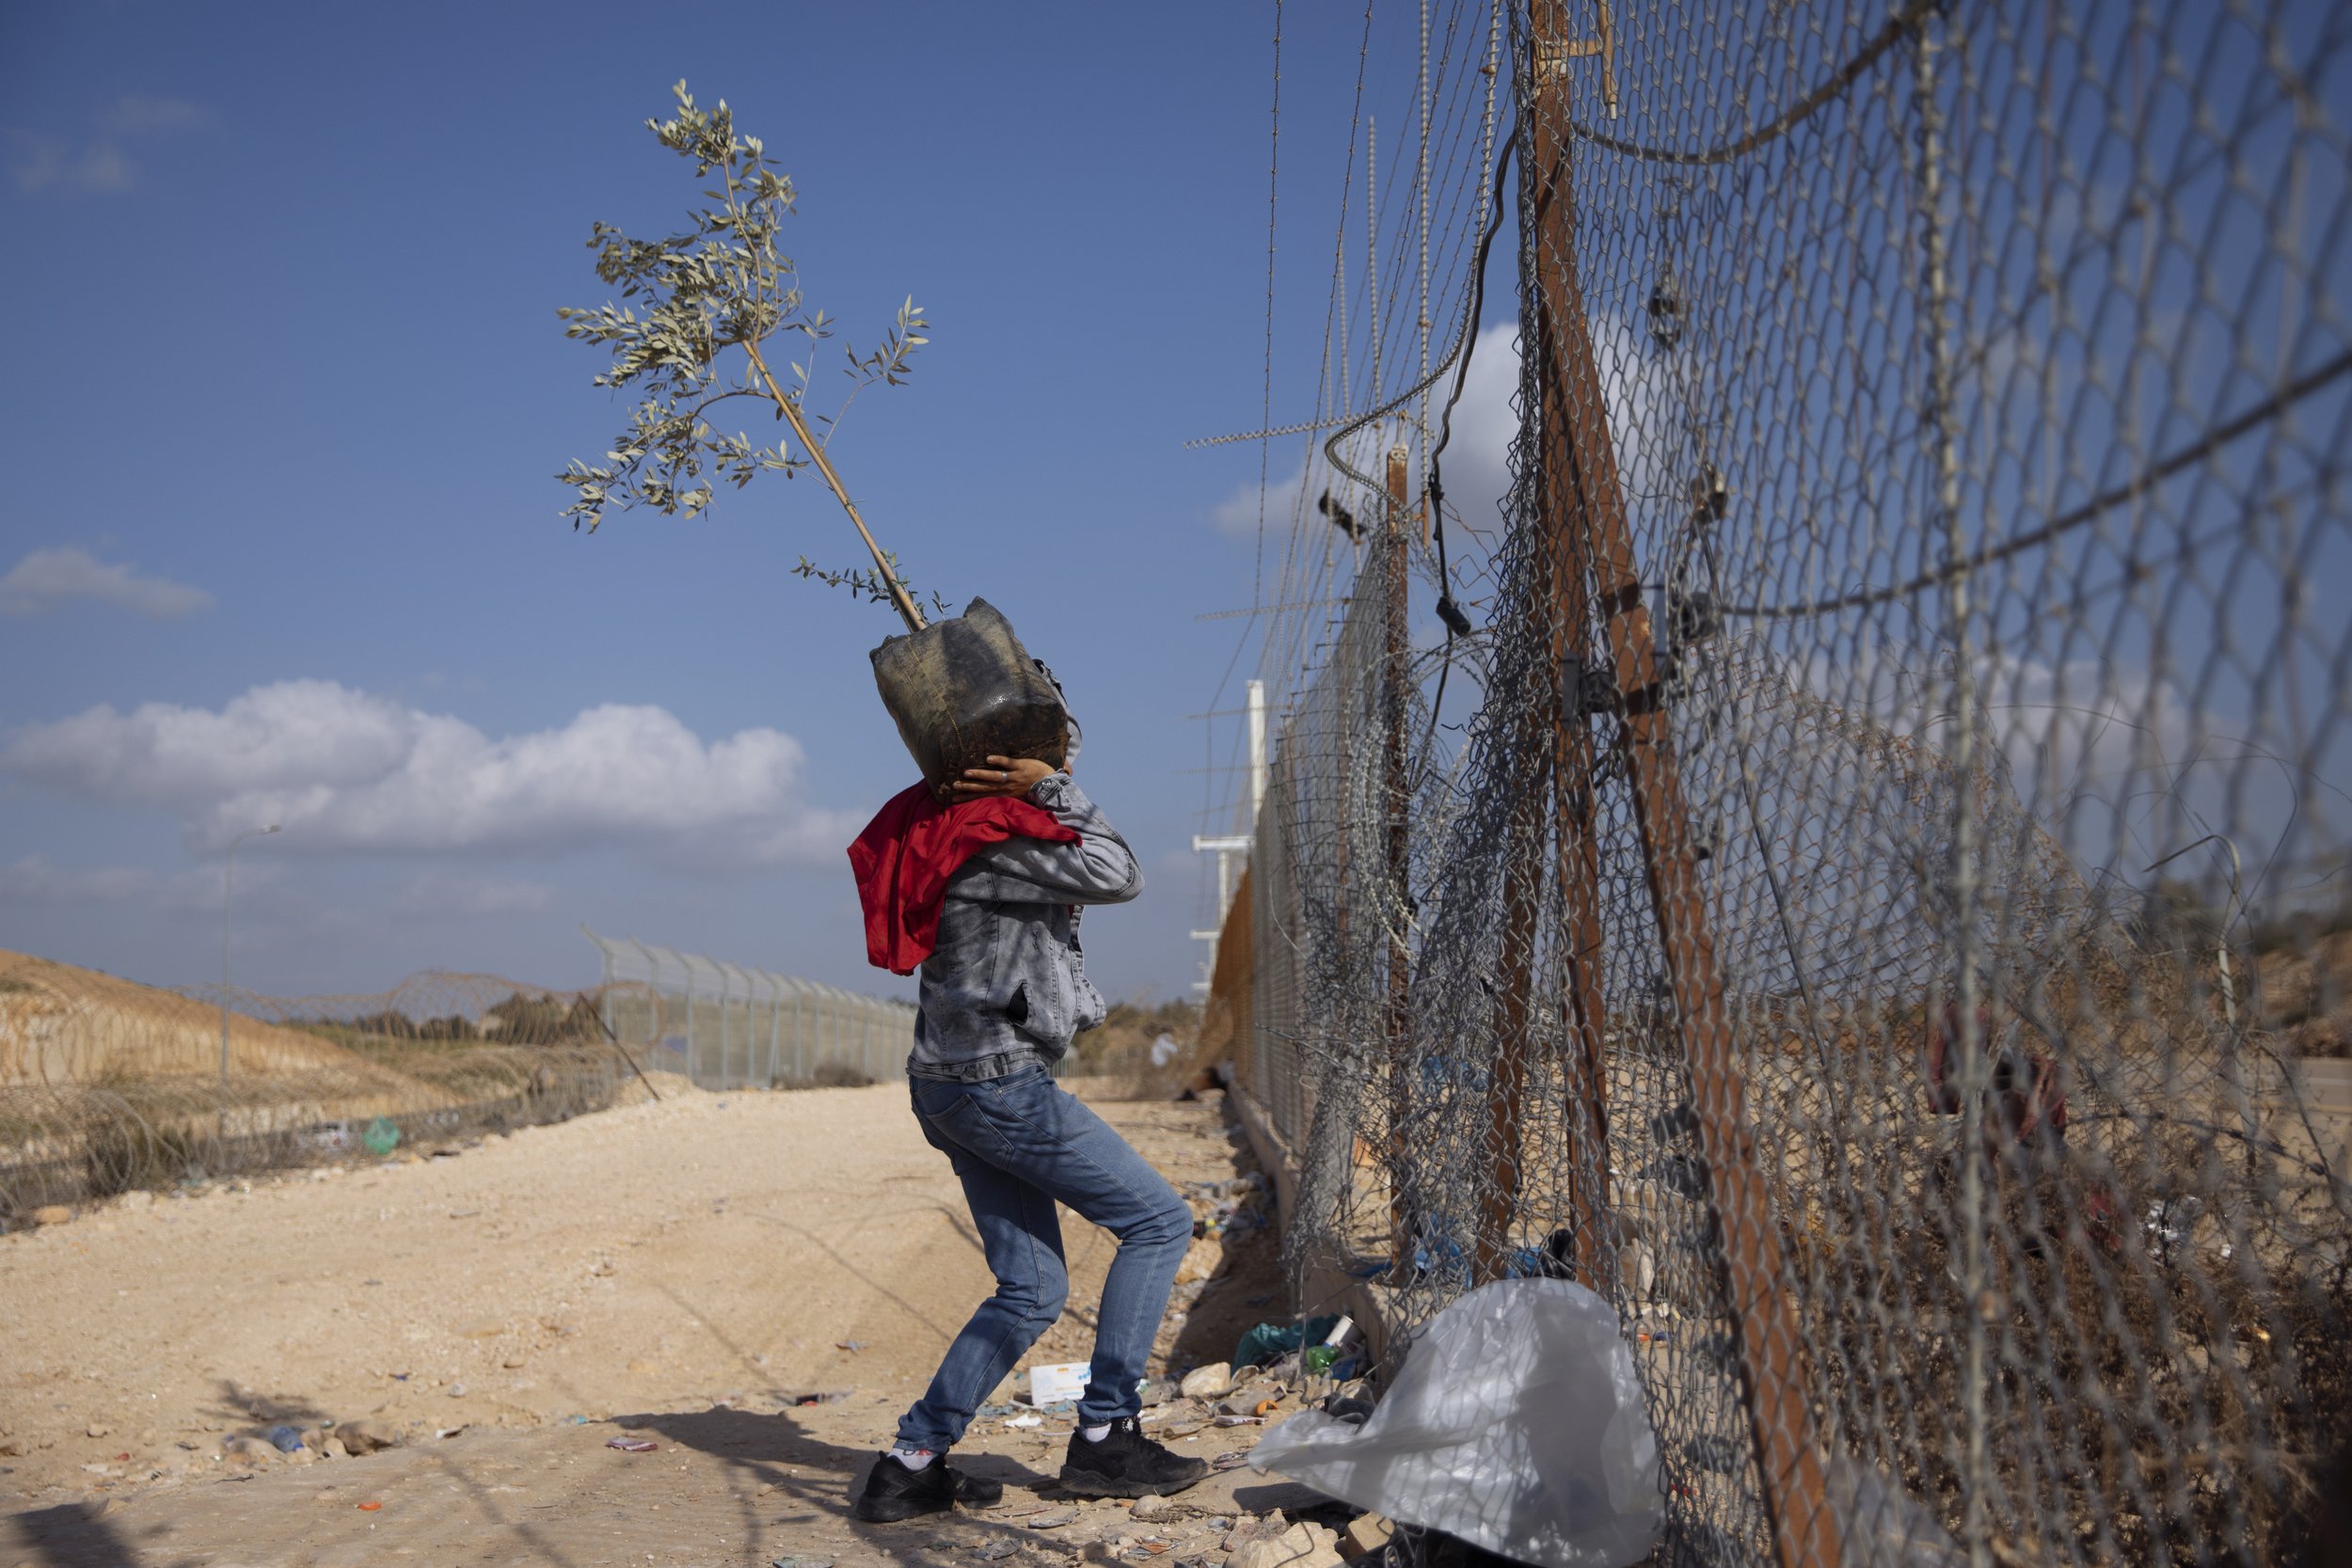  A Palestinian man carries an olive tree as he crosses illegally into Israel from the West Bank, through a gap in the separation barrier, south of the West Bank town of Hebron, on March 8, 2021. (AP Photo/Oded Balilty) 